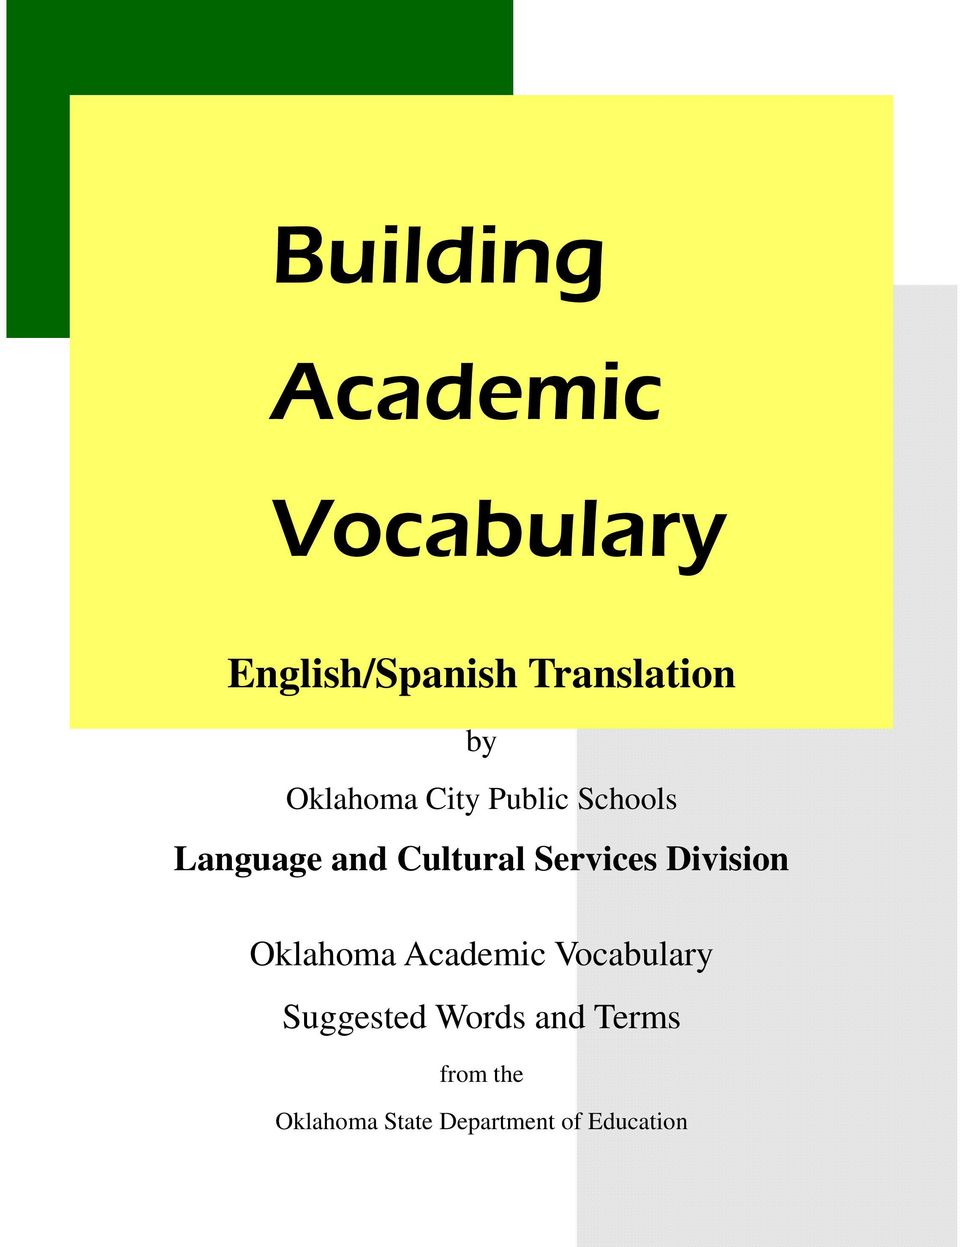 Services Division Oklahoma Academic Vocabulary Suggested